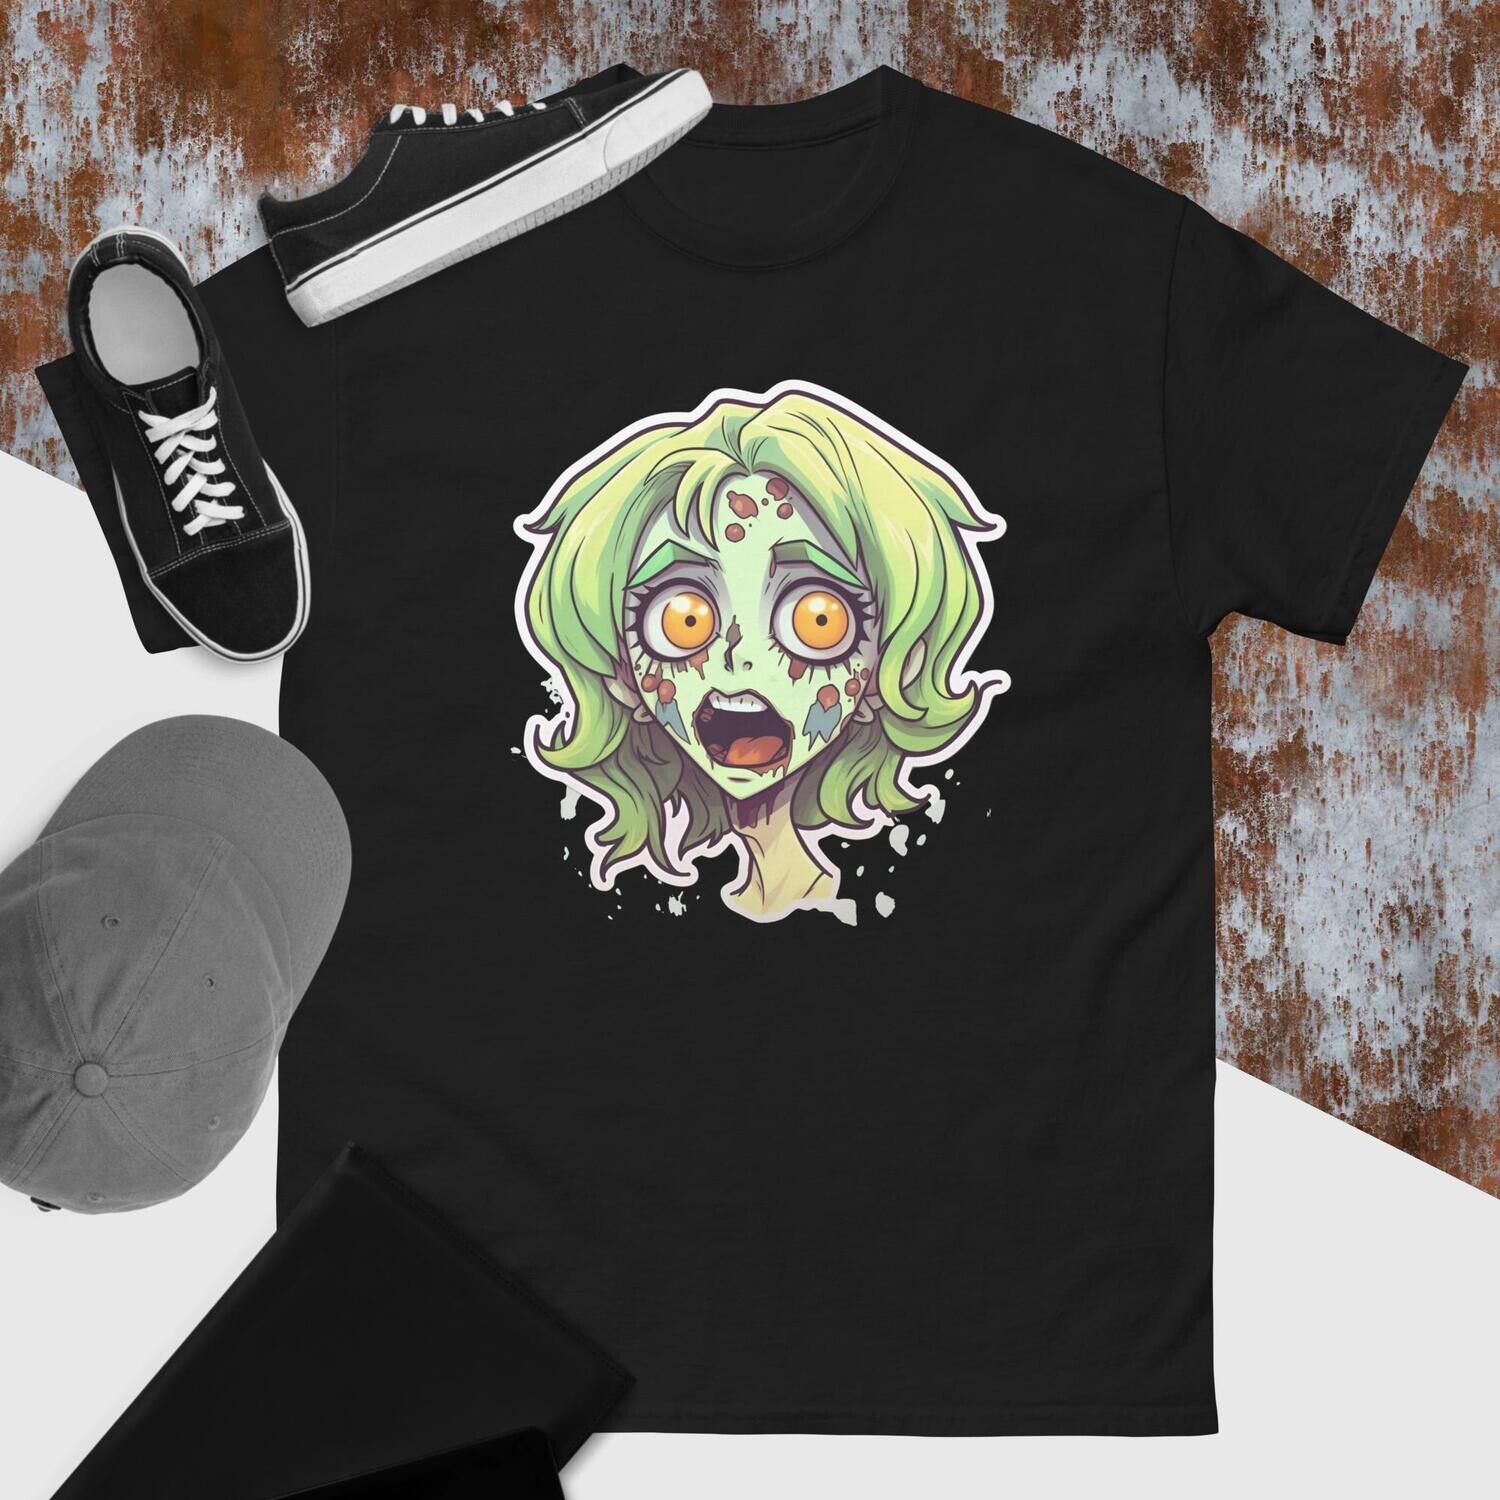 Adorably Fierce Zombie Girl T-Shirt - Unleash Your Inner Undead Chic!